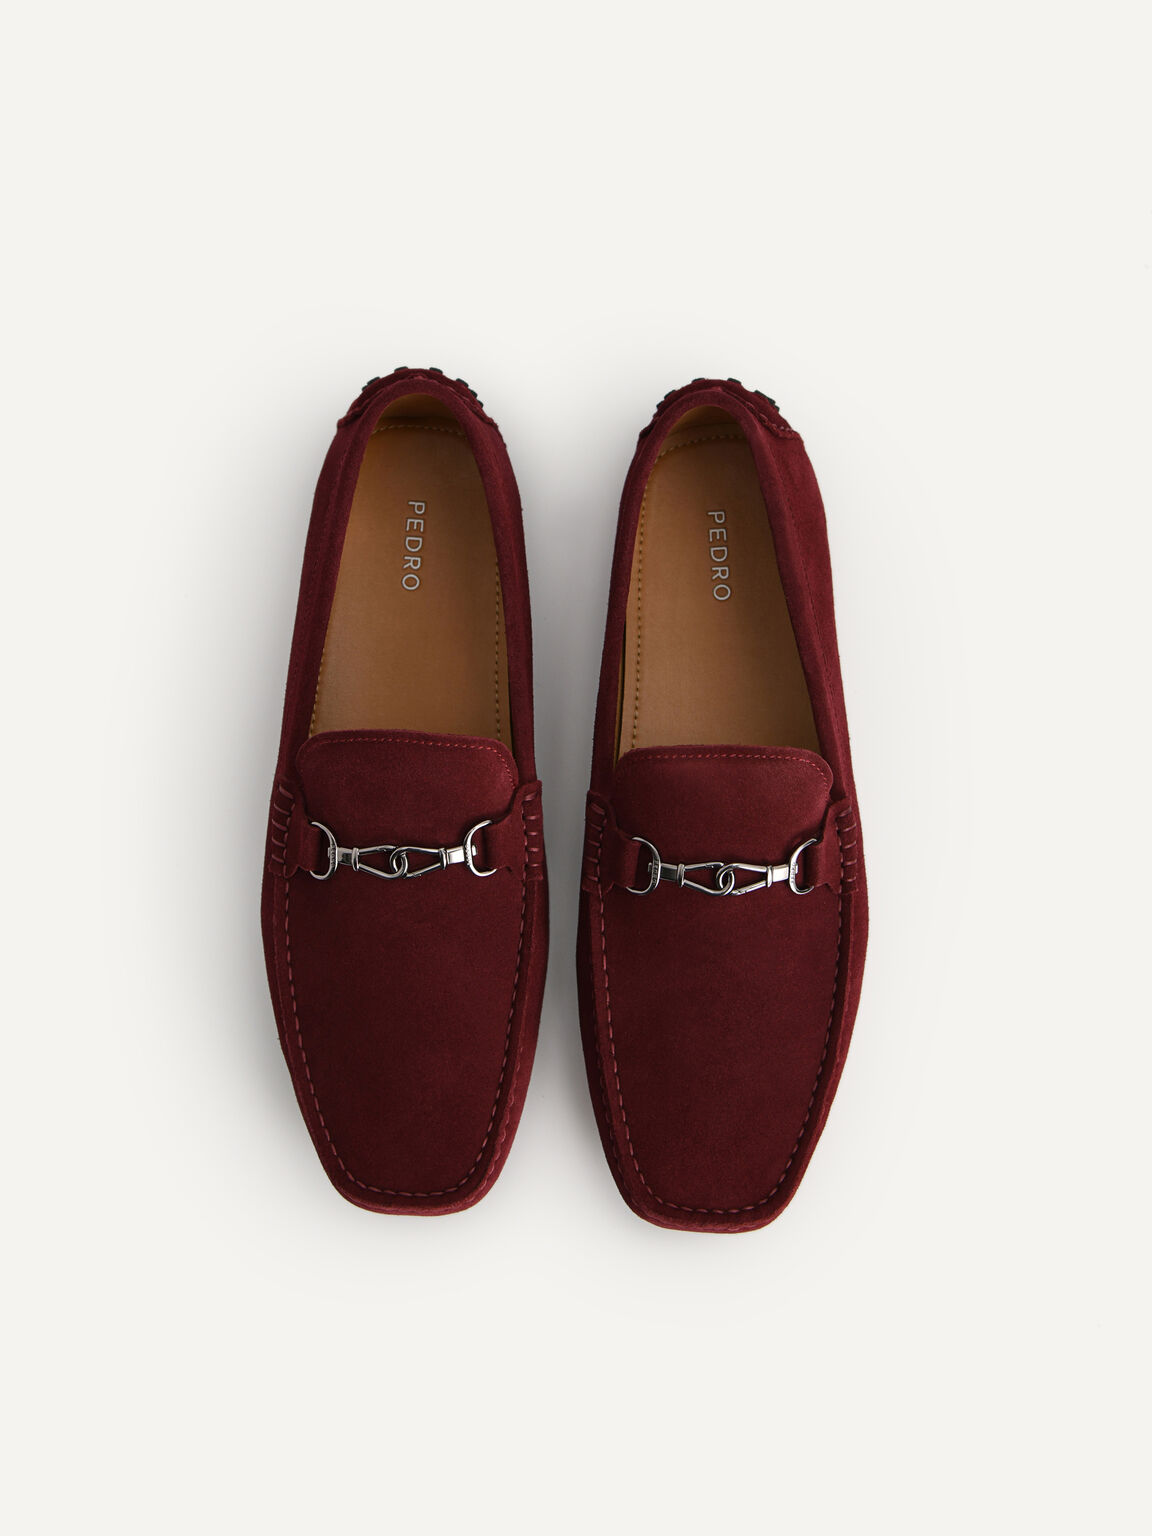 Suede Moccasins with Metal Bit, Maroon